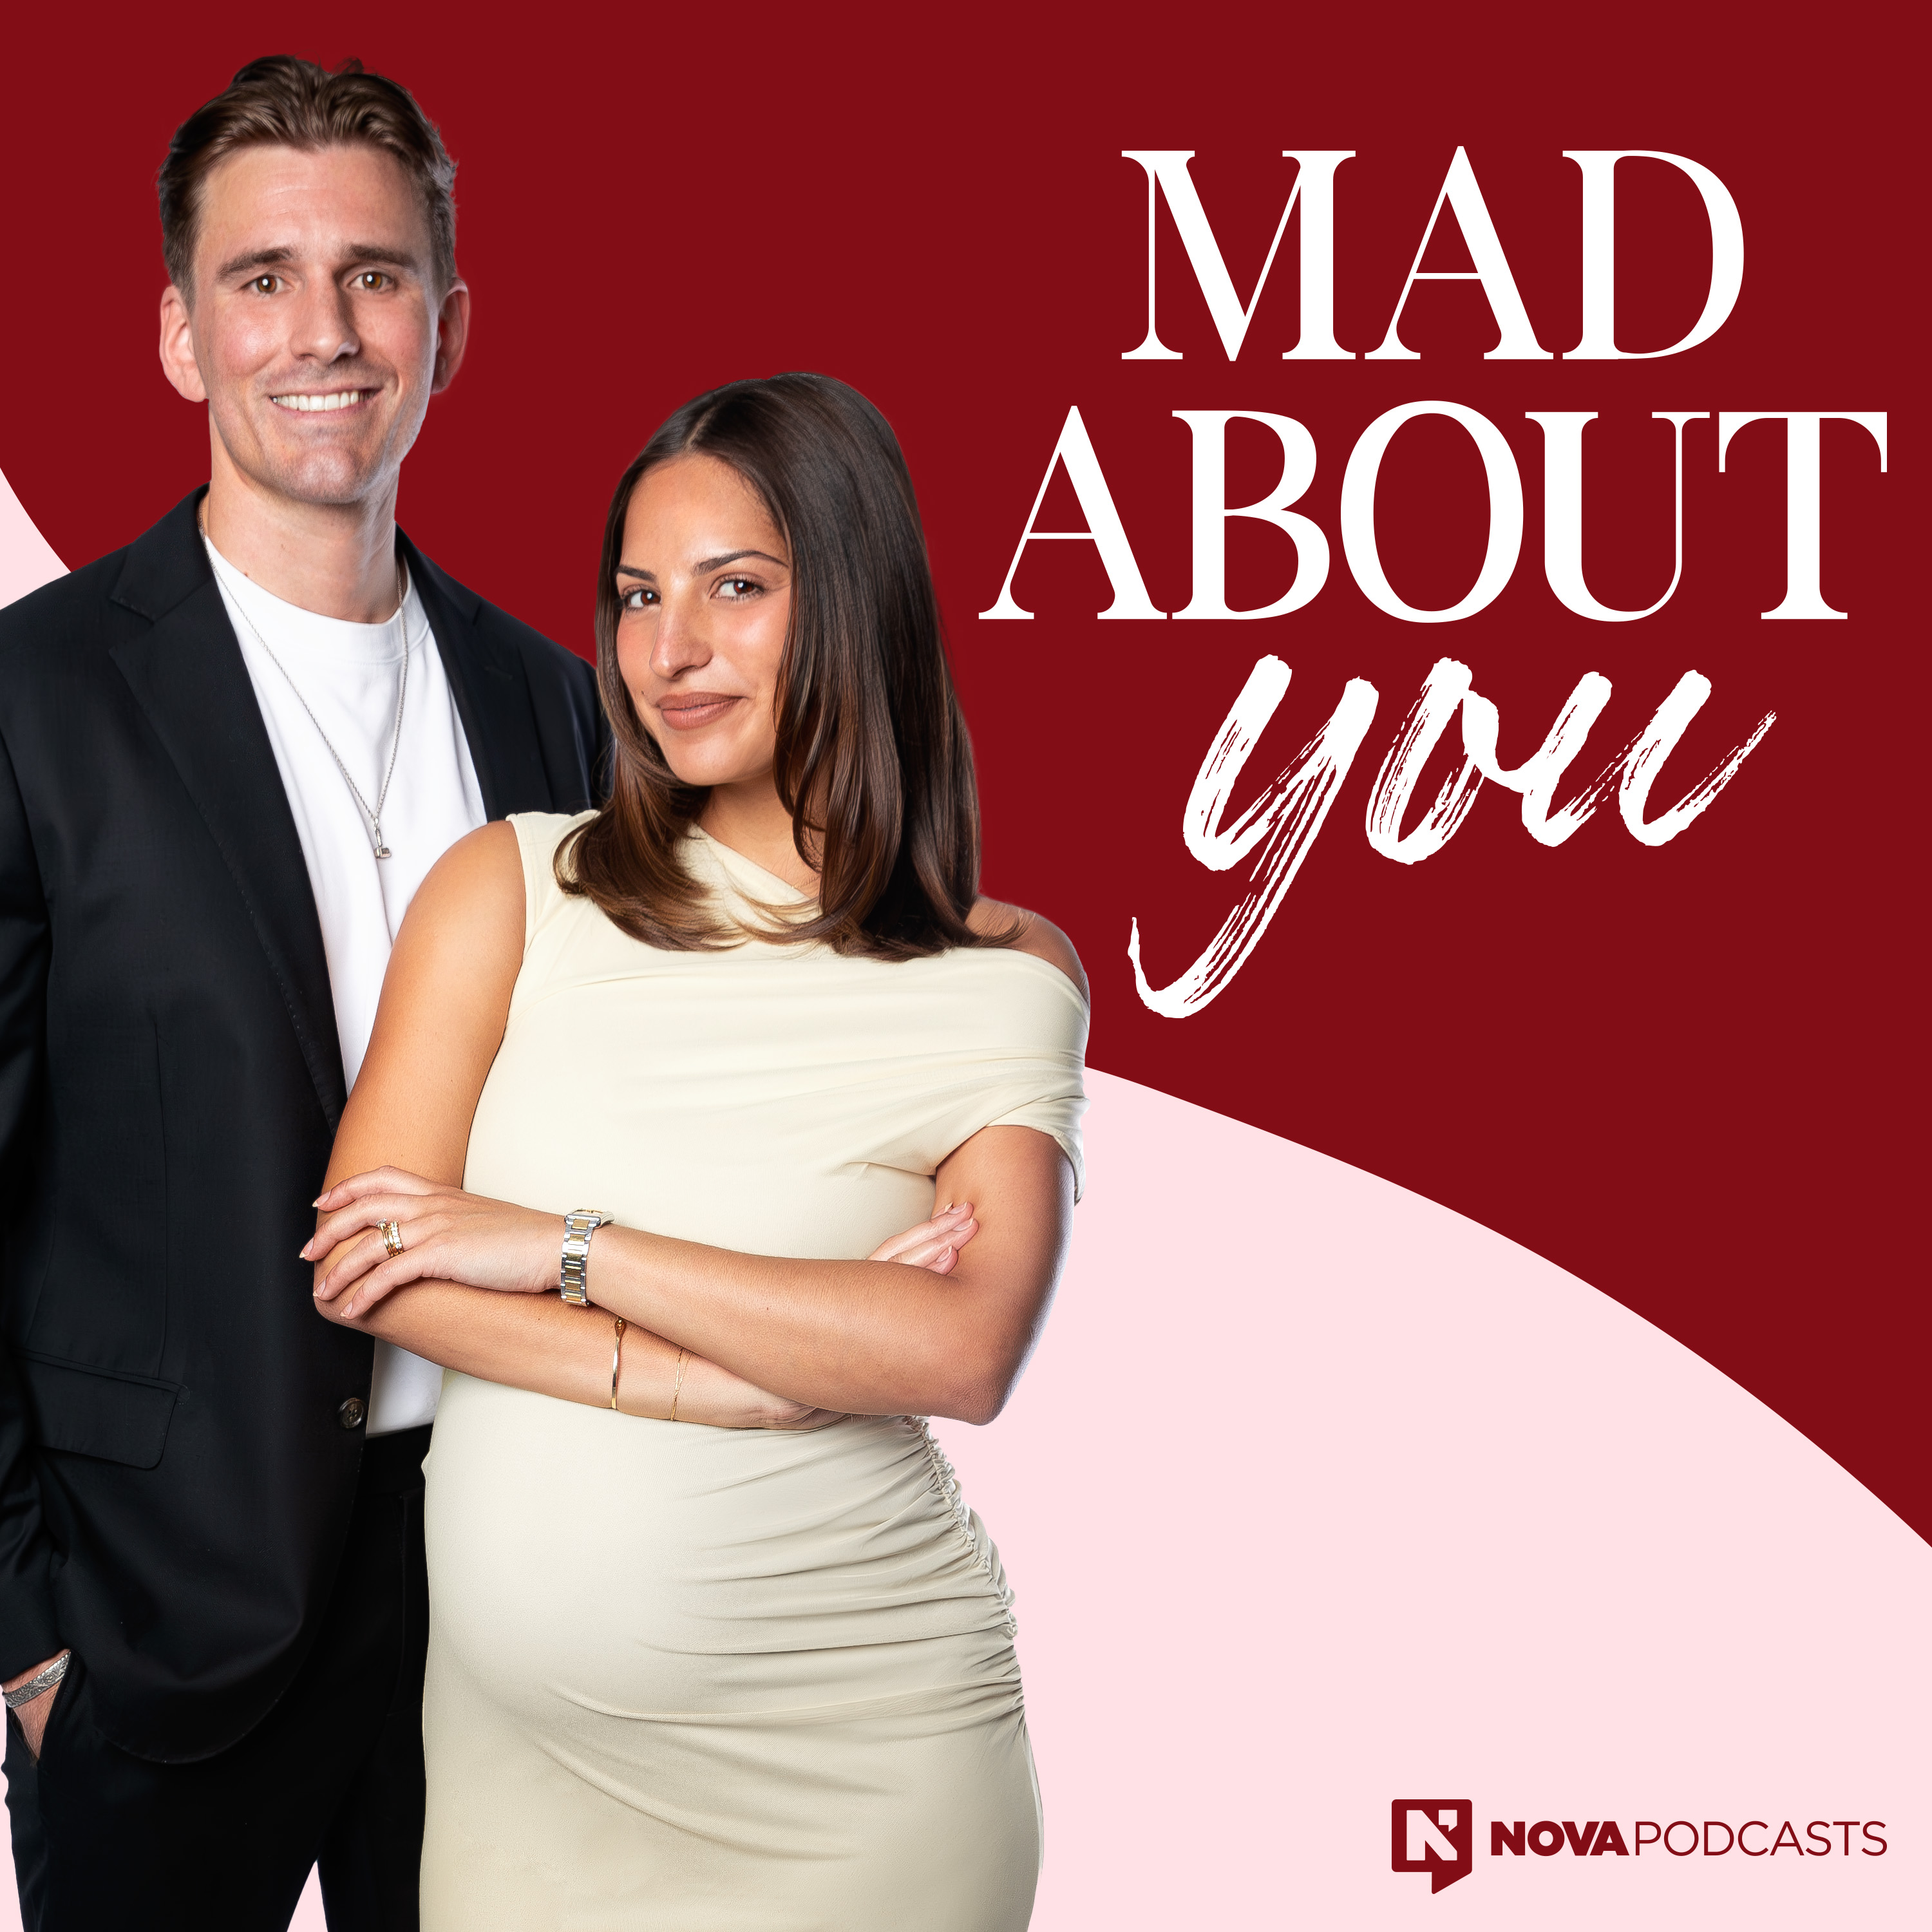 Introducing: Mad About You